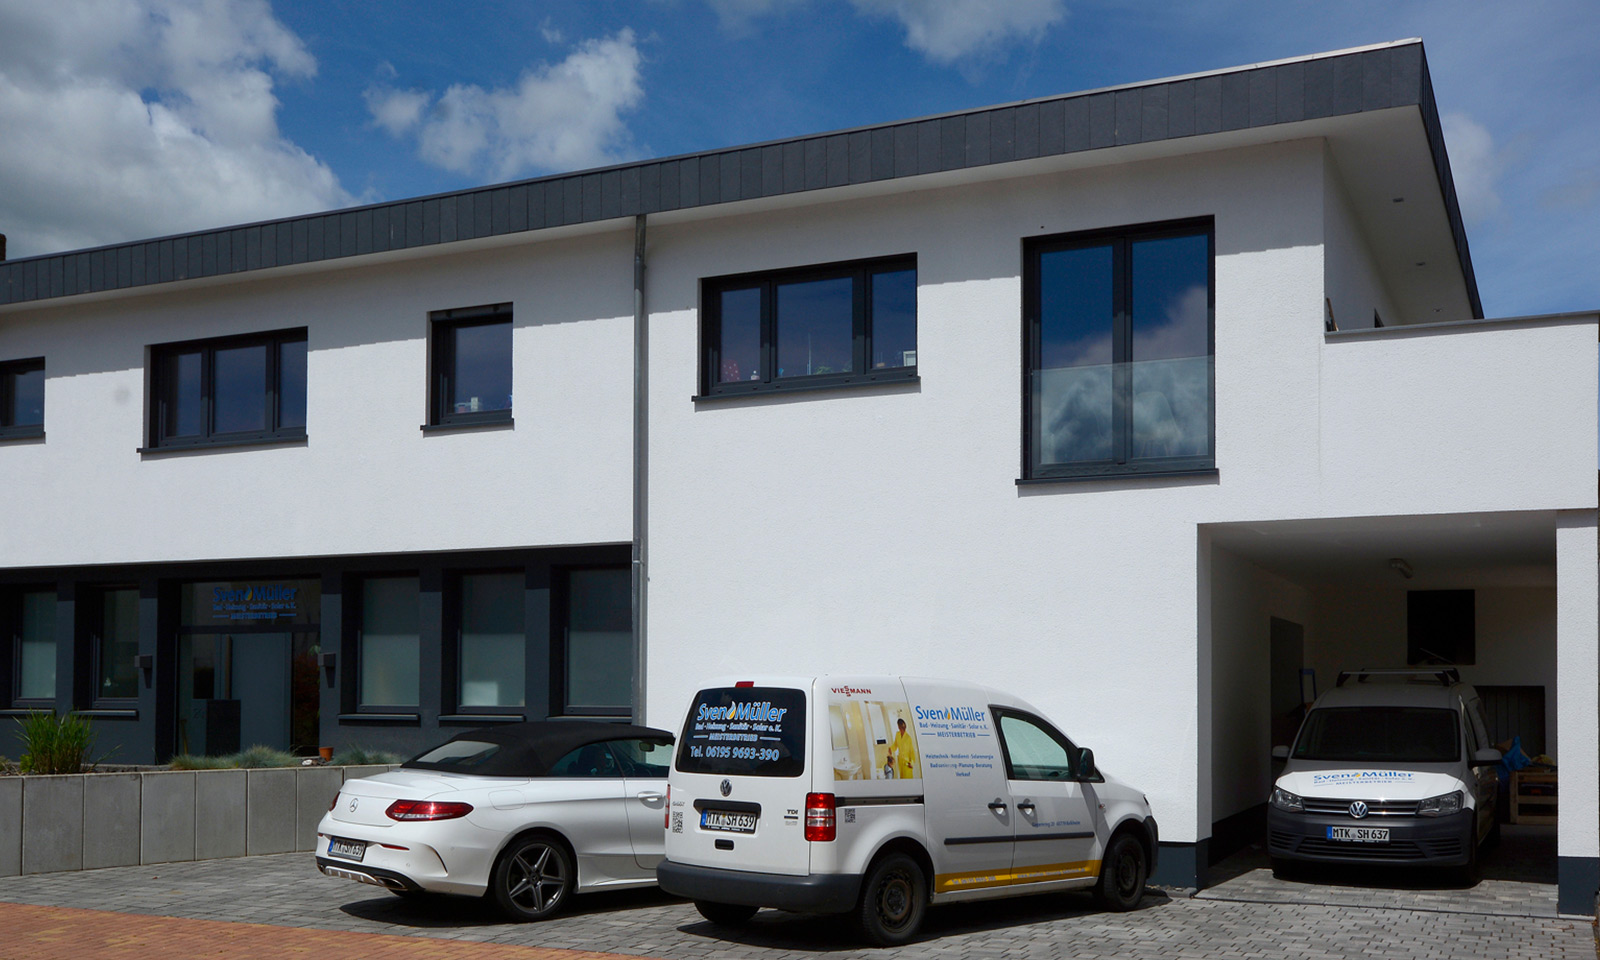 Company building with new extension, Kelkheim